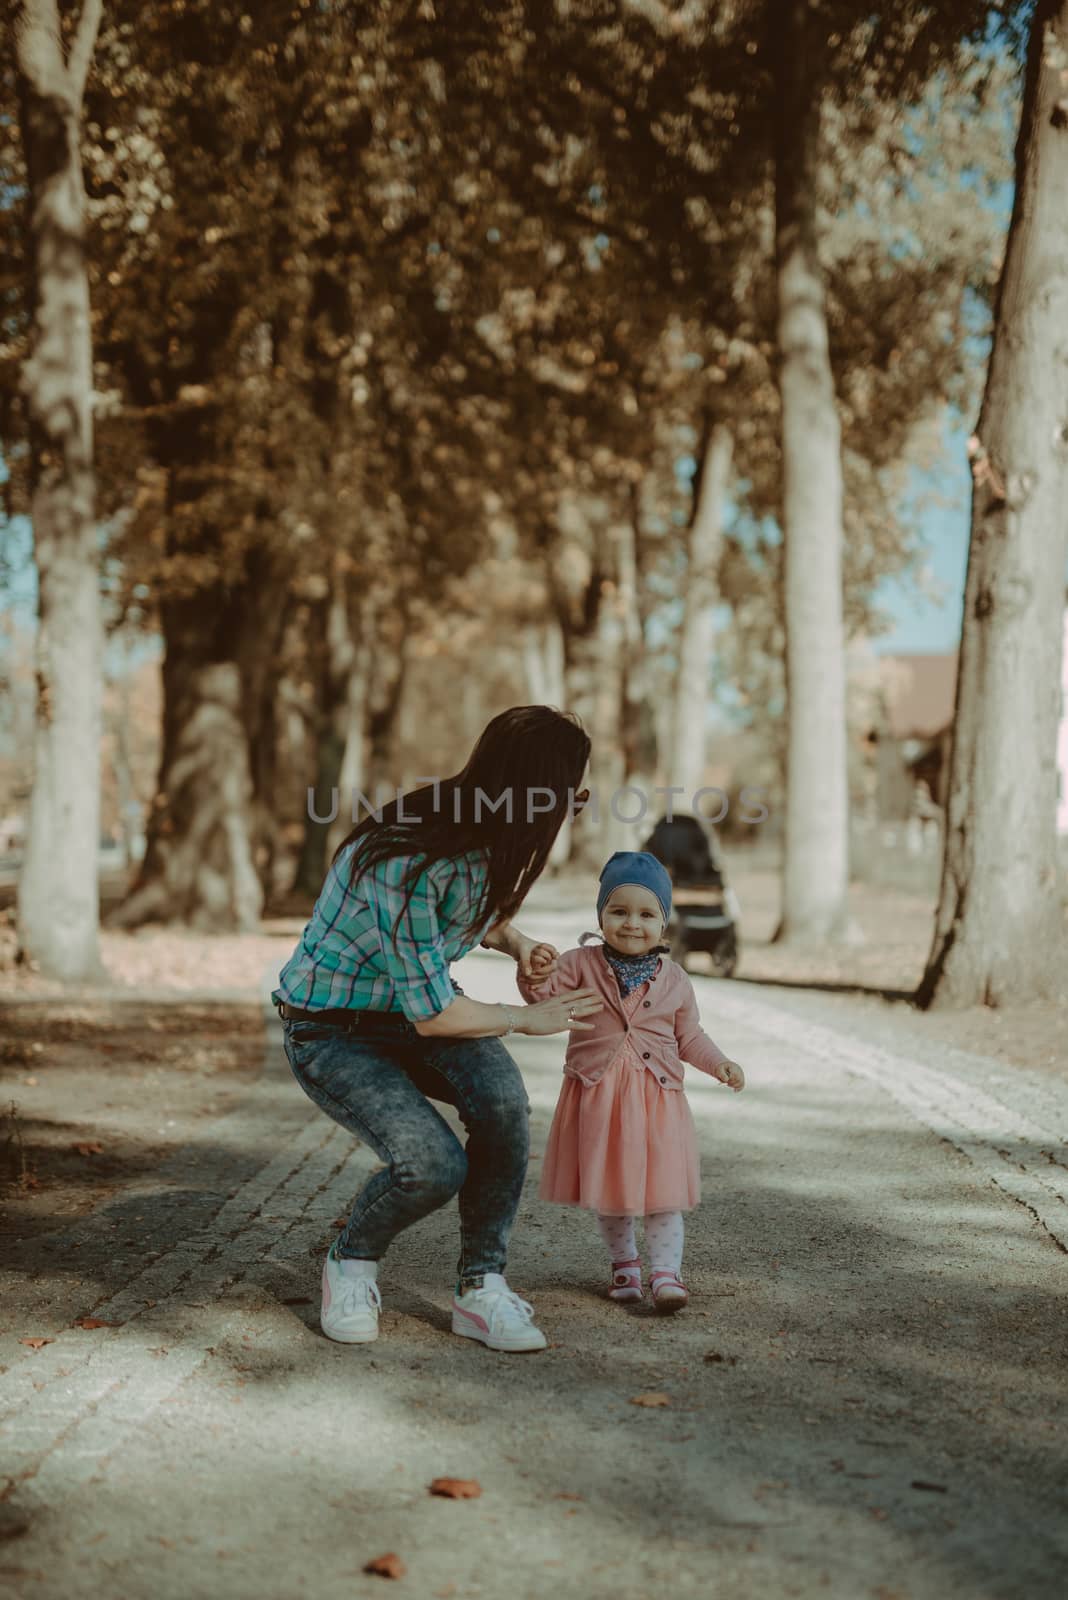 Happy mother and daughter in the park. Beauty nature scene with  by Brejeq